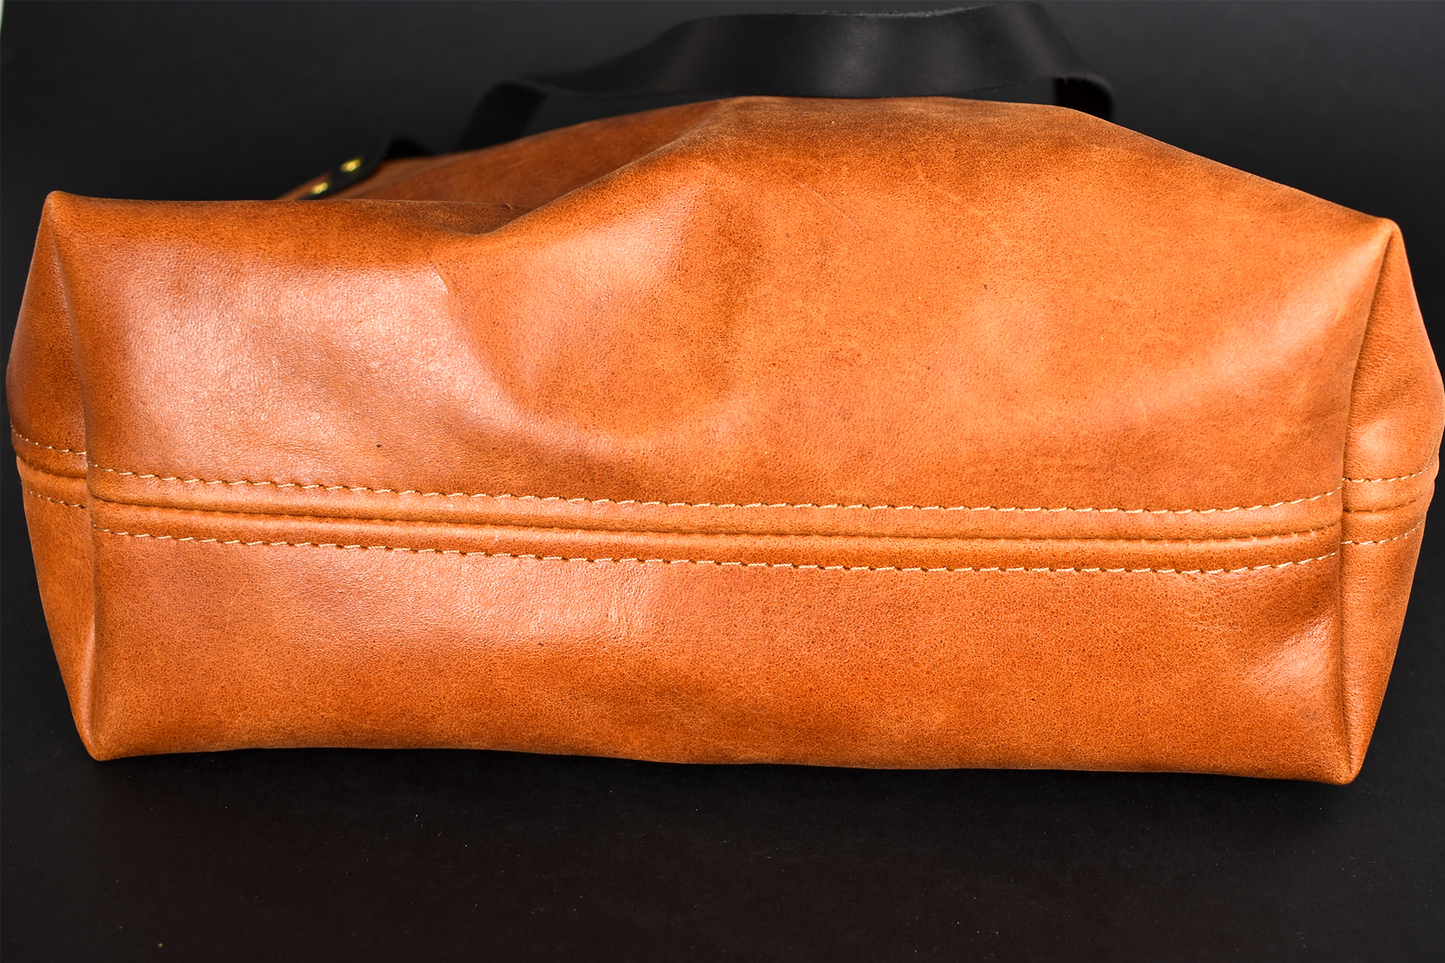 Leather Tote Bag